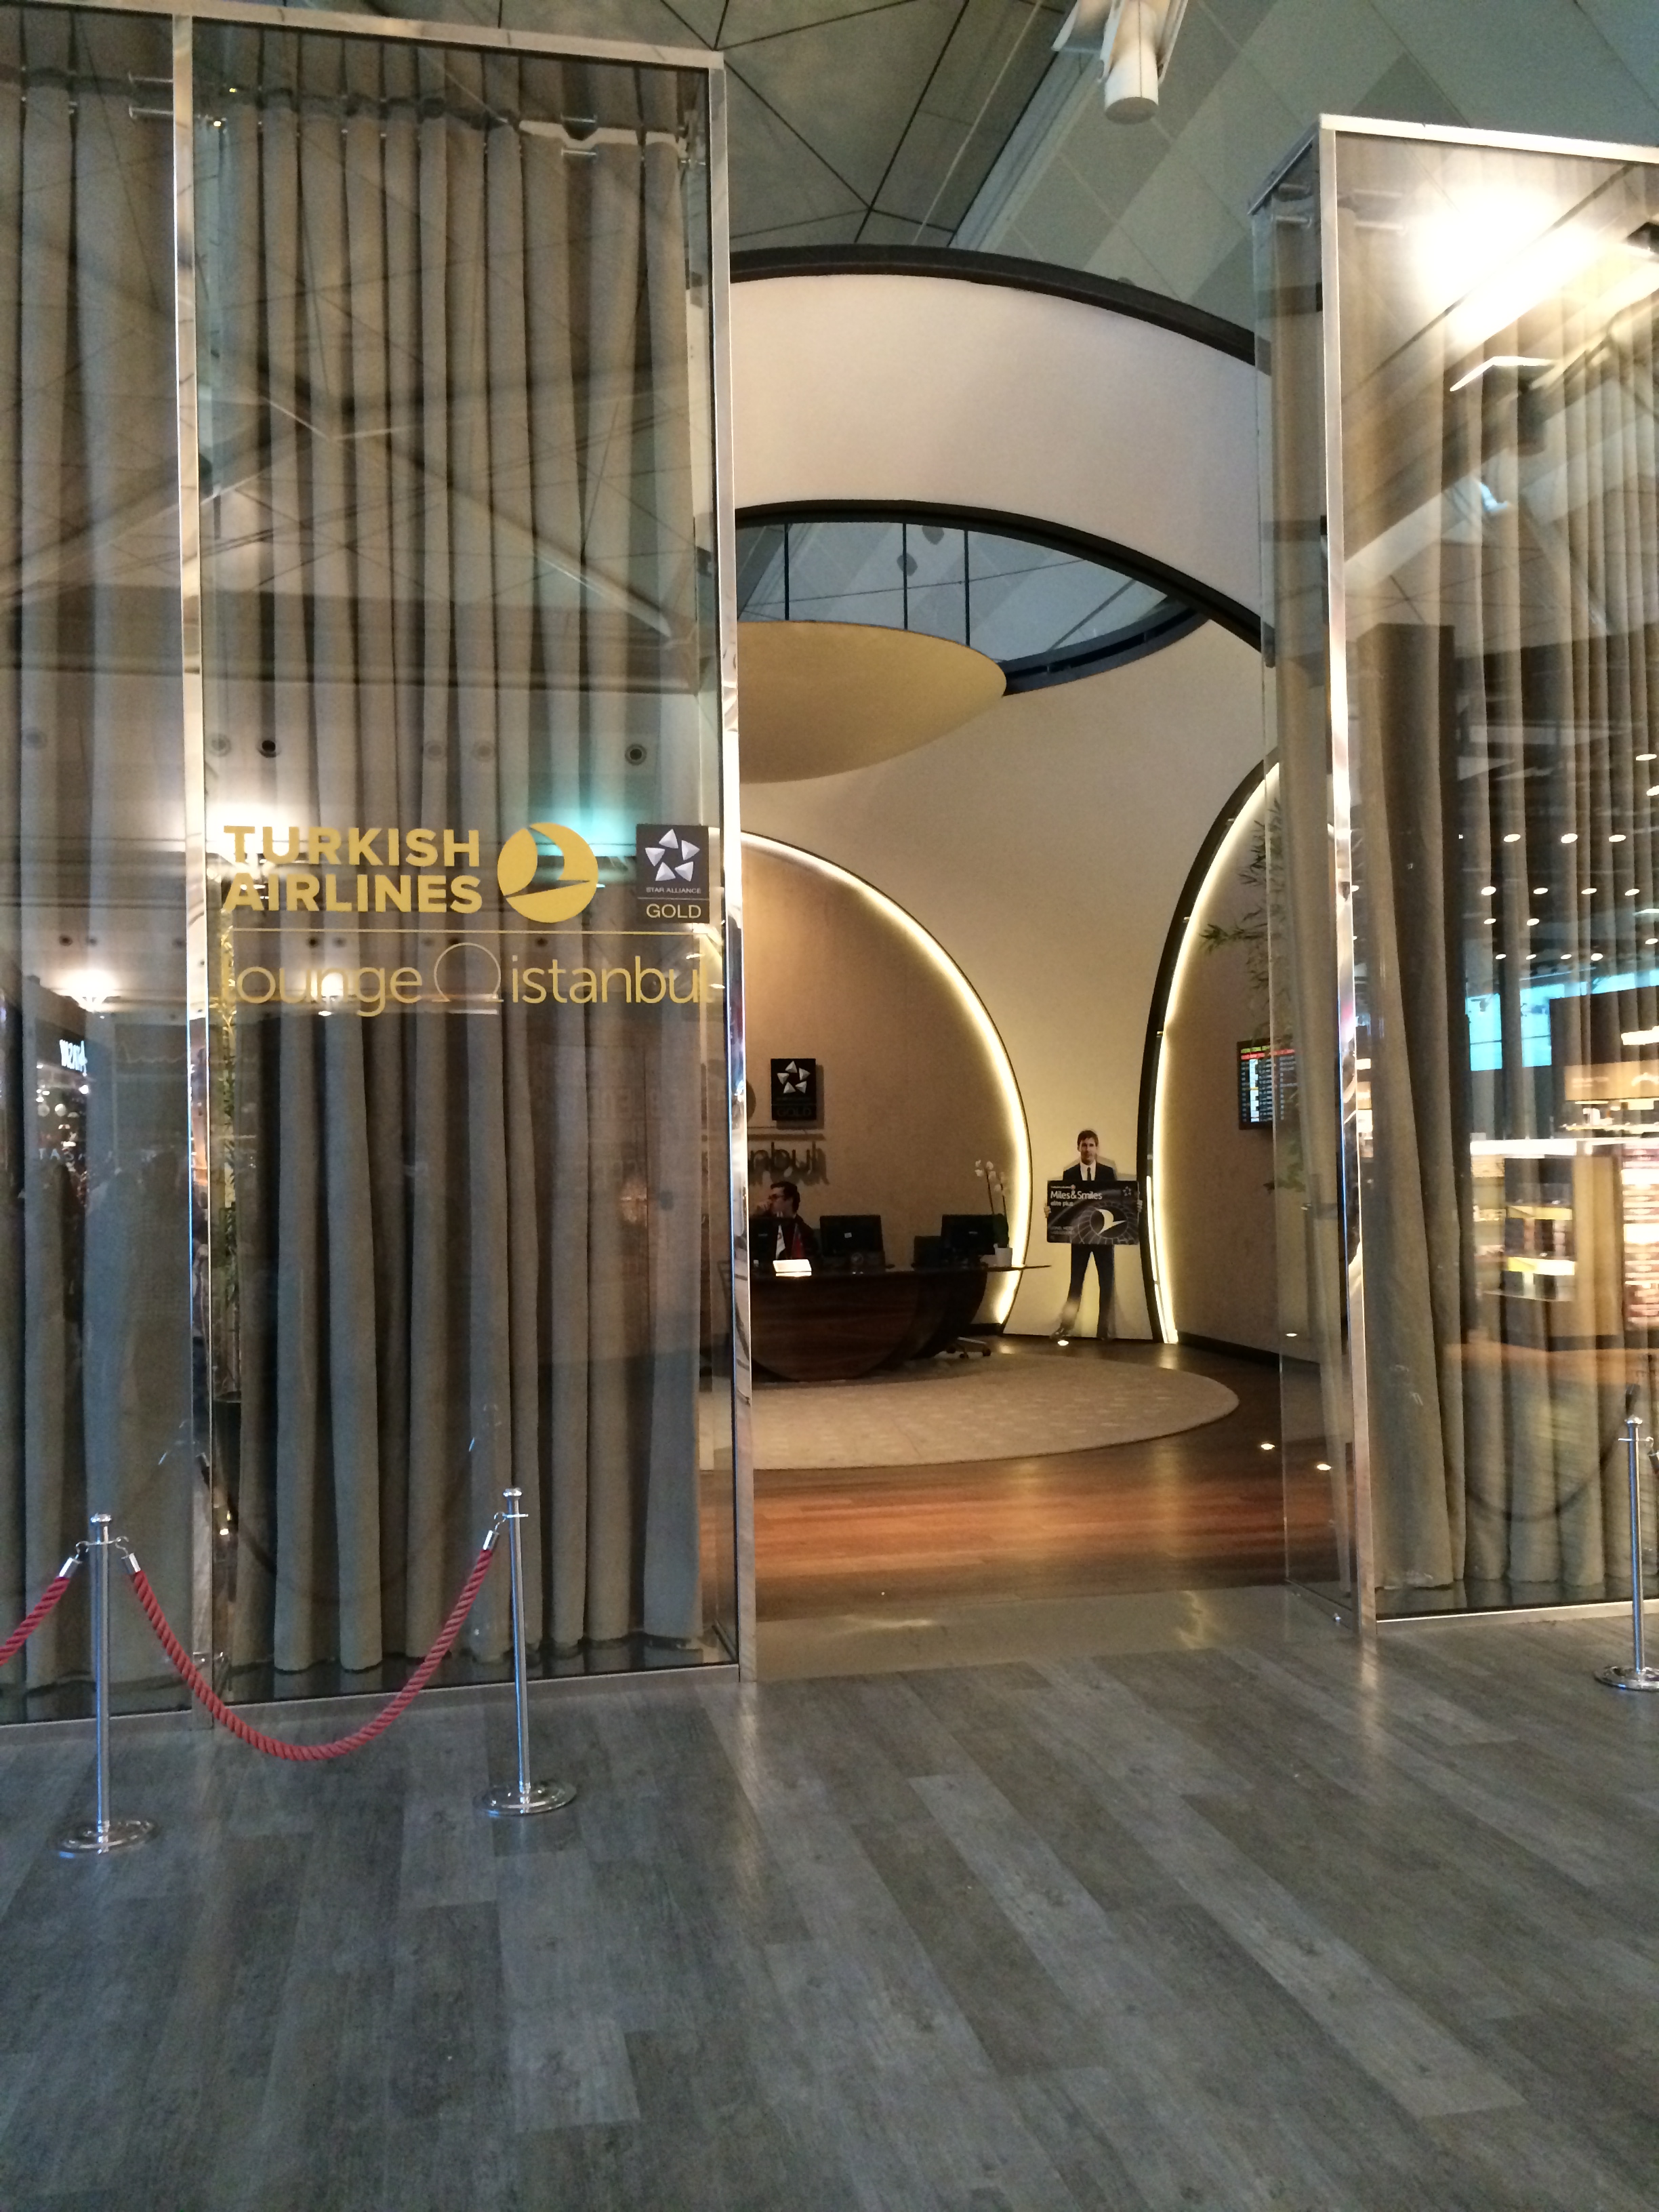 Turkish Airlines lounge entrance